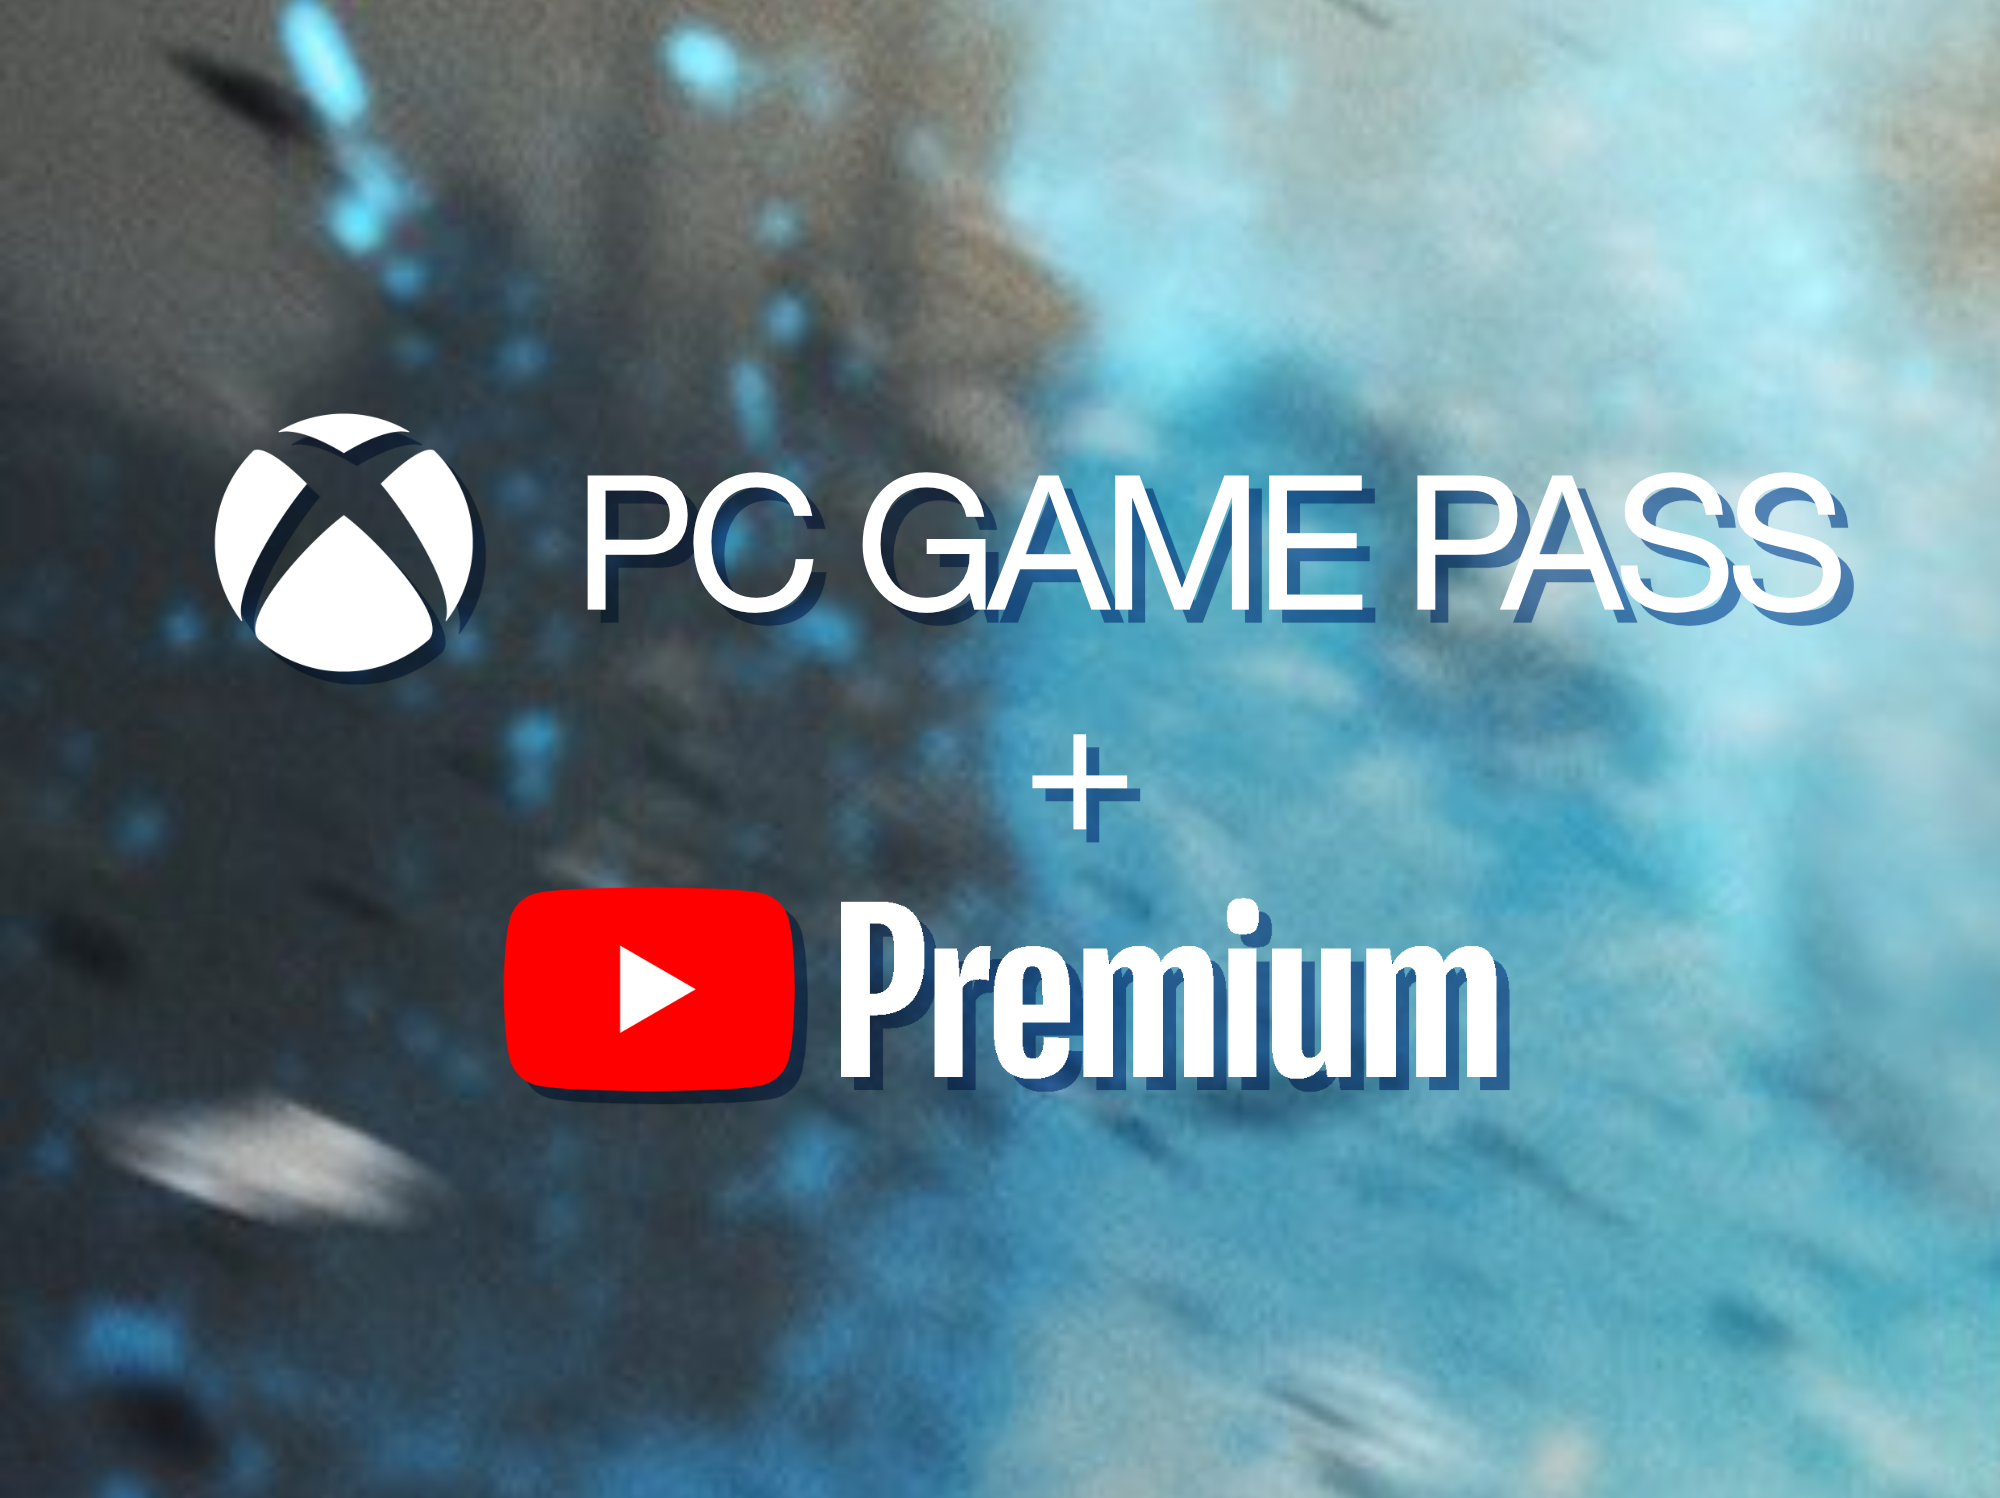 How to get 3-months of PC Game Pass with your YouTube Premium subscription